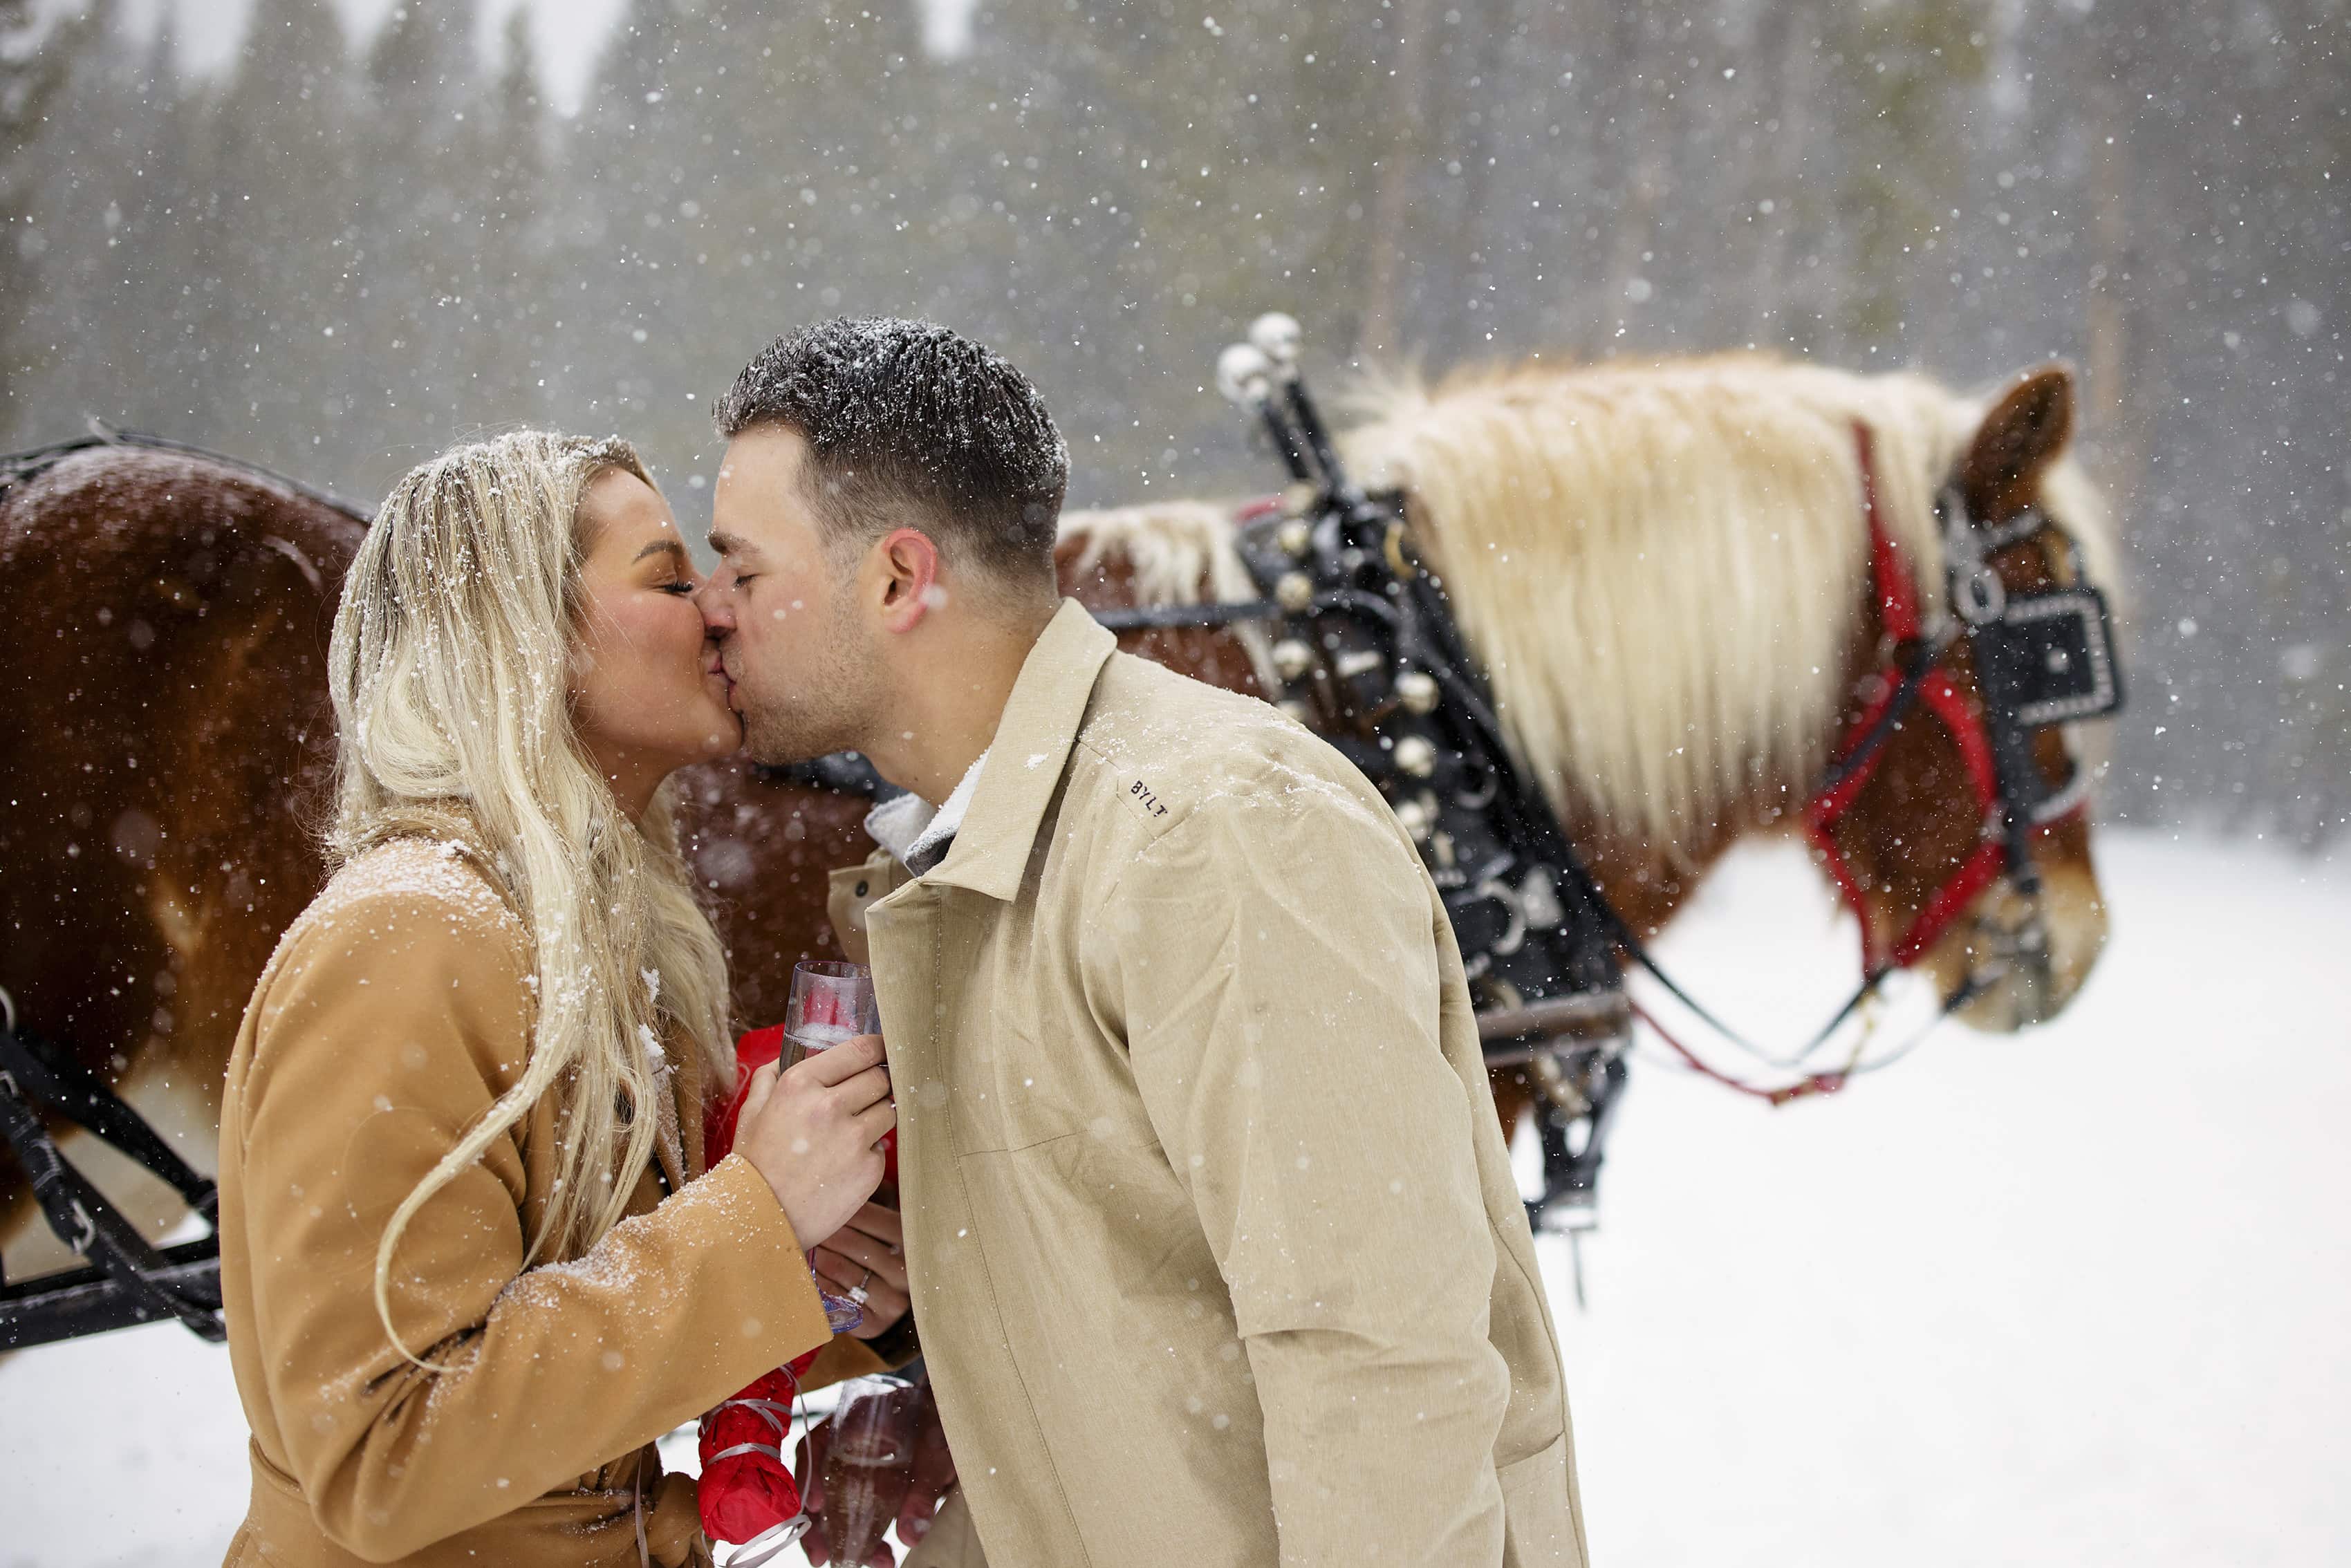 A newly engaged couple kisses near a horse